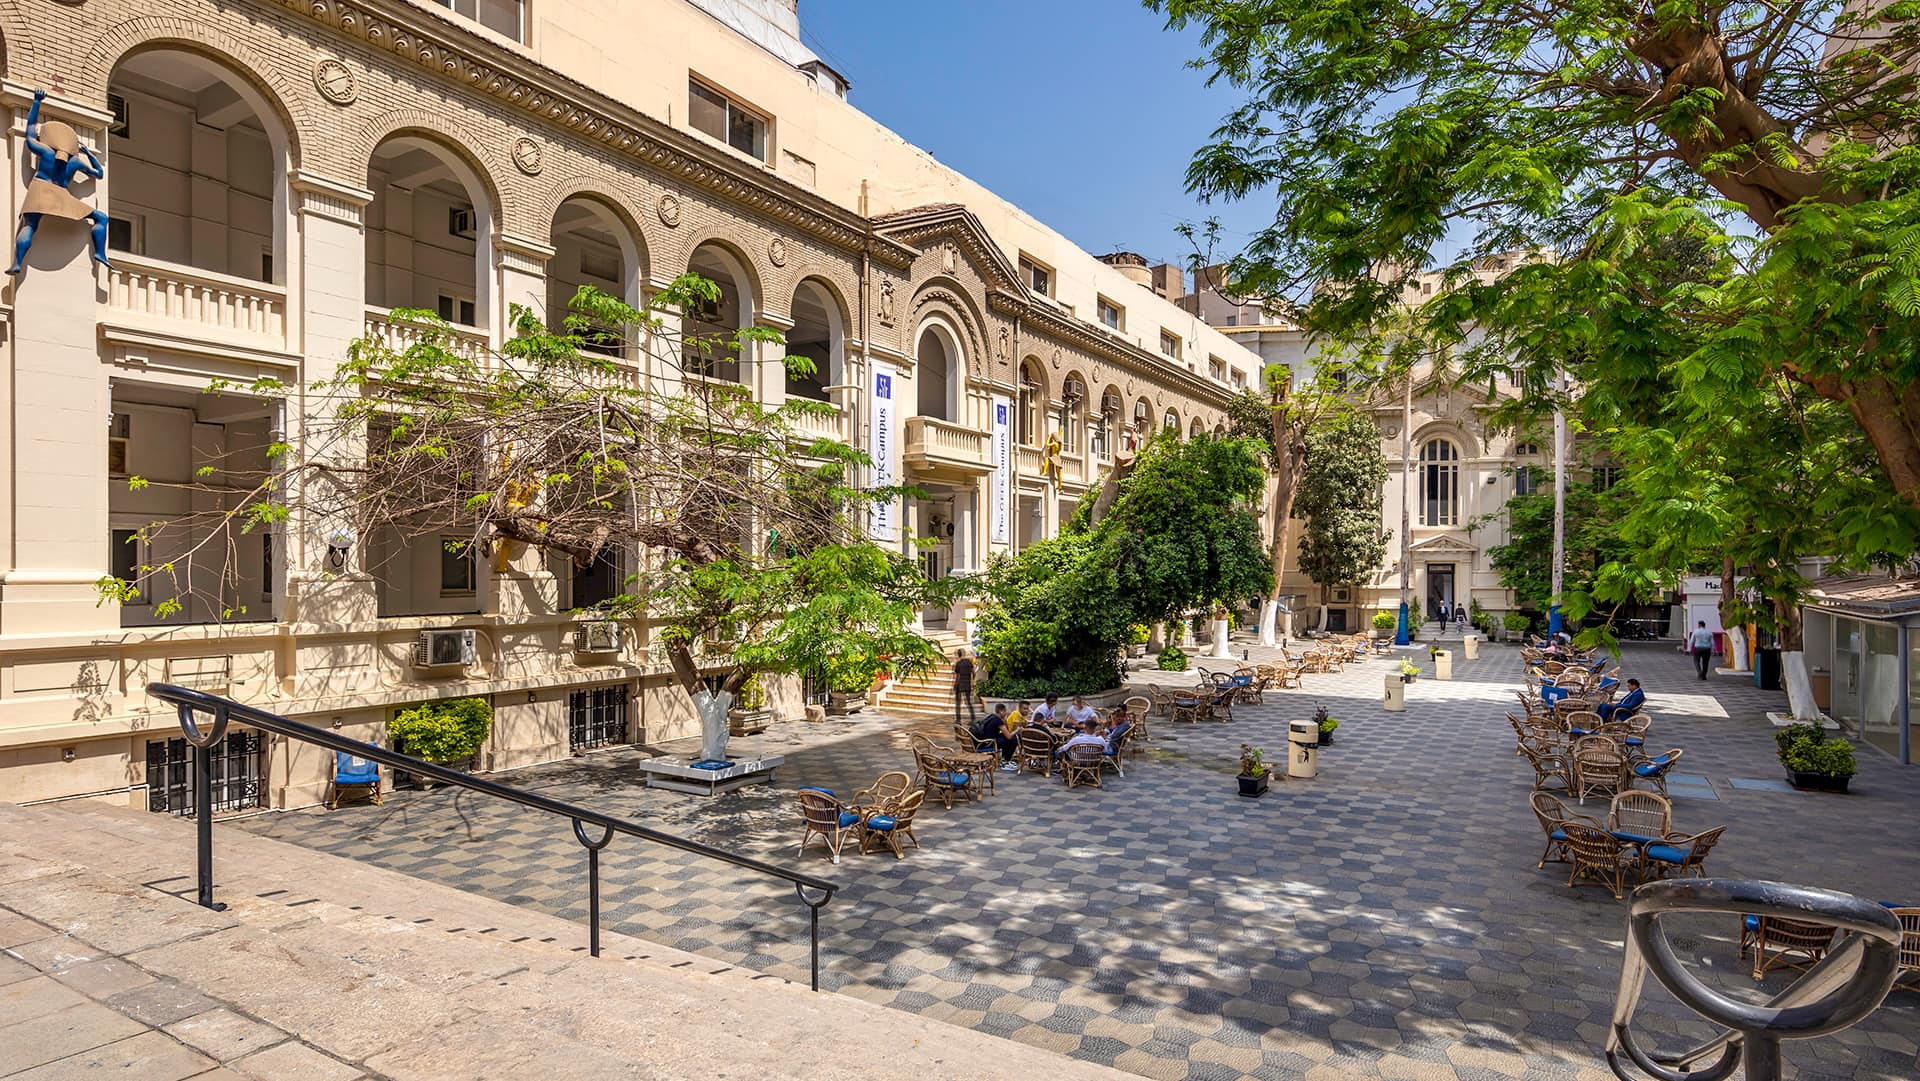 The GrEEK Campus images Downtown, Cairo Egypt Rent Auditorium Rent Recording and Filming Studio Rent Meeting Rooms Rent Coworking Space Rent Coworking Space